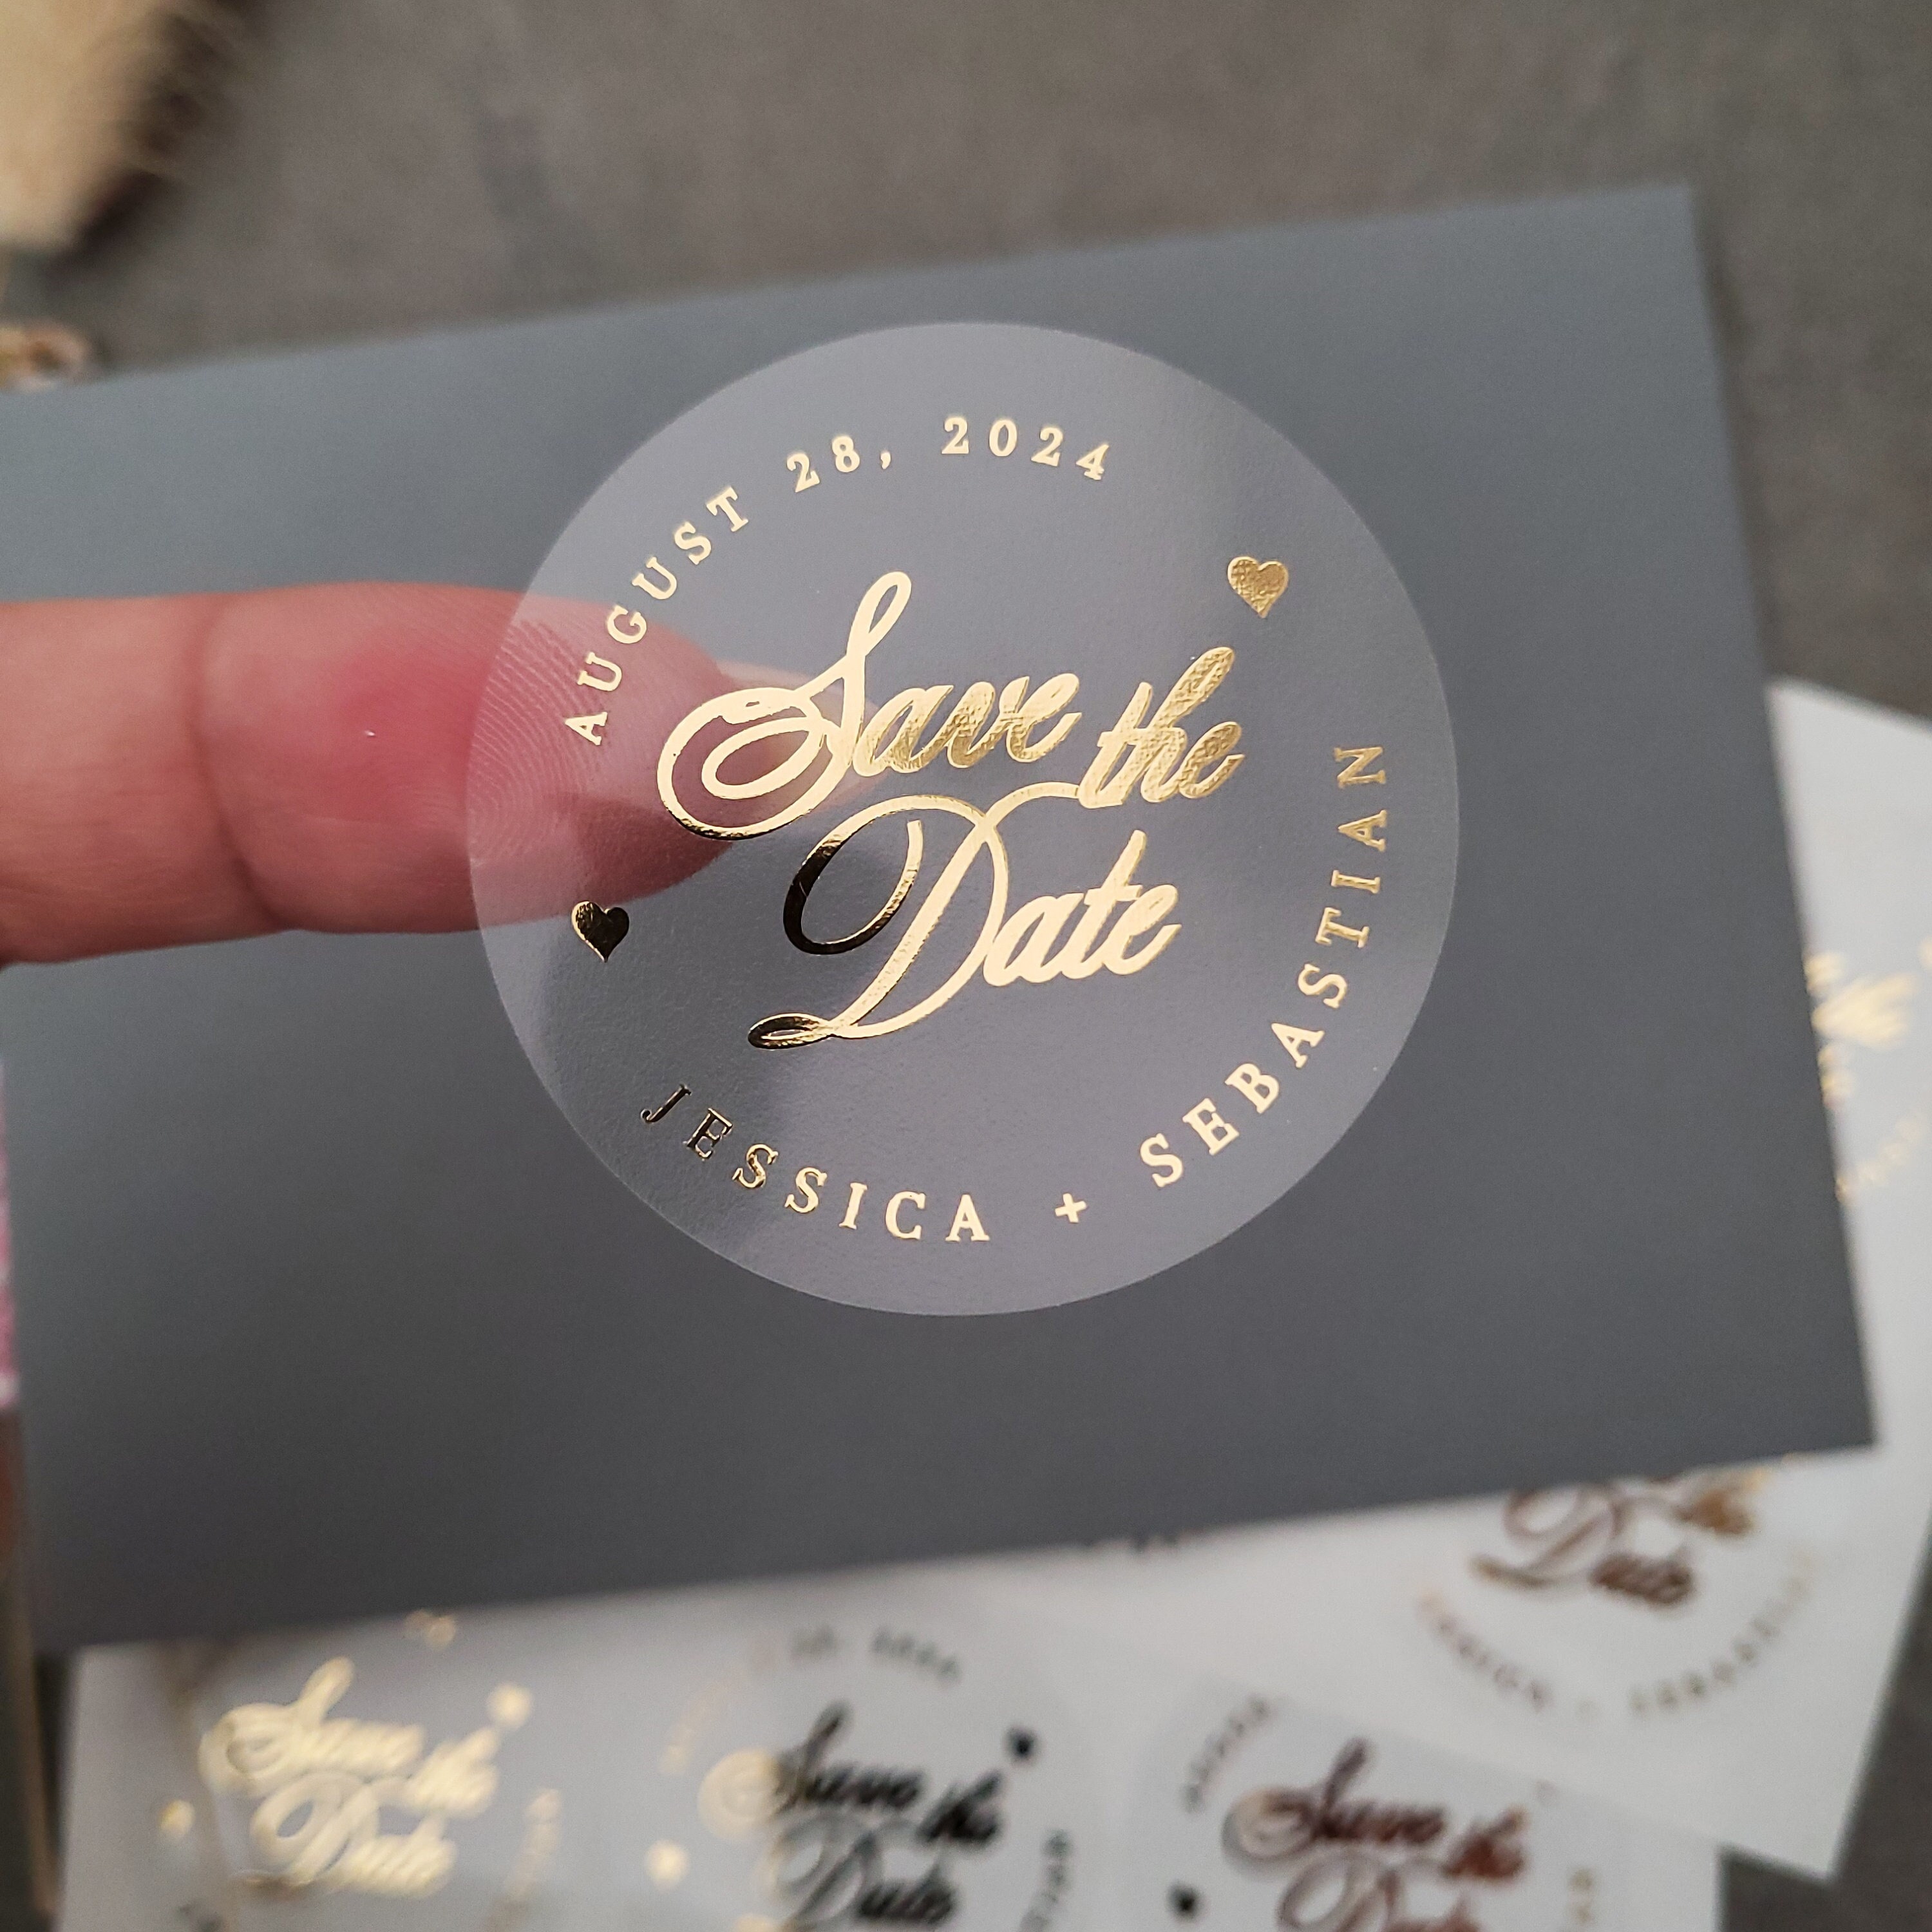 Gold Hello Foil Envelope Seals by Recollections™